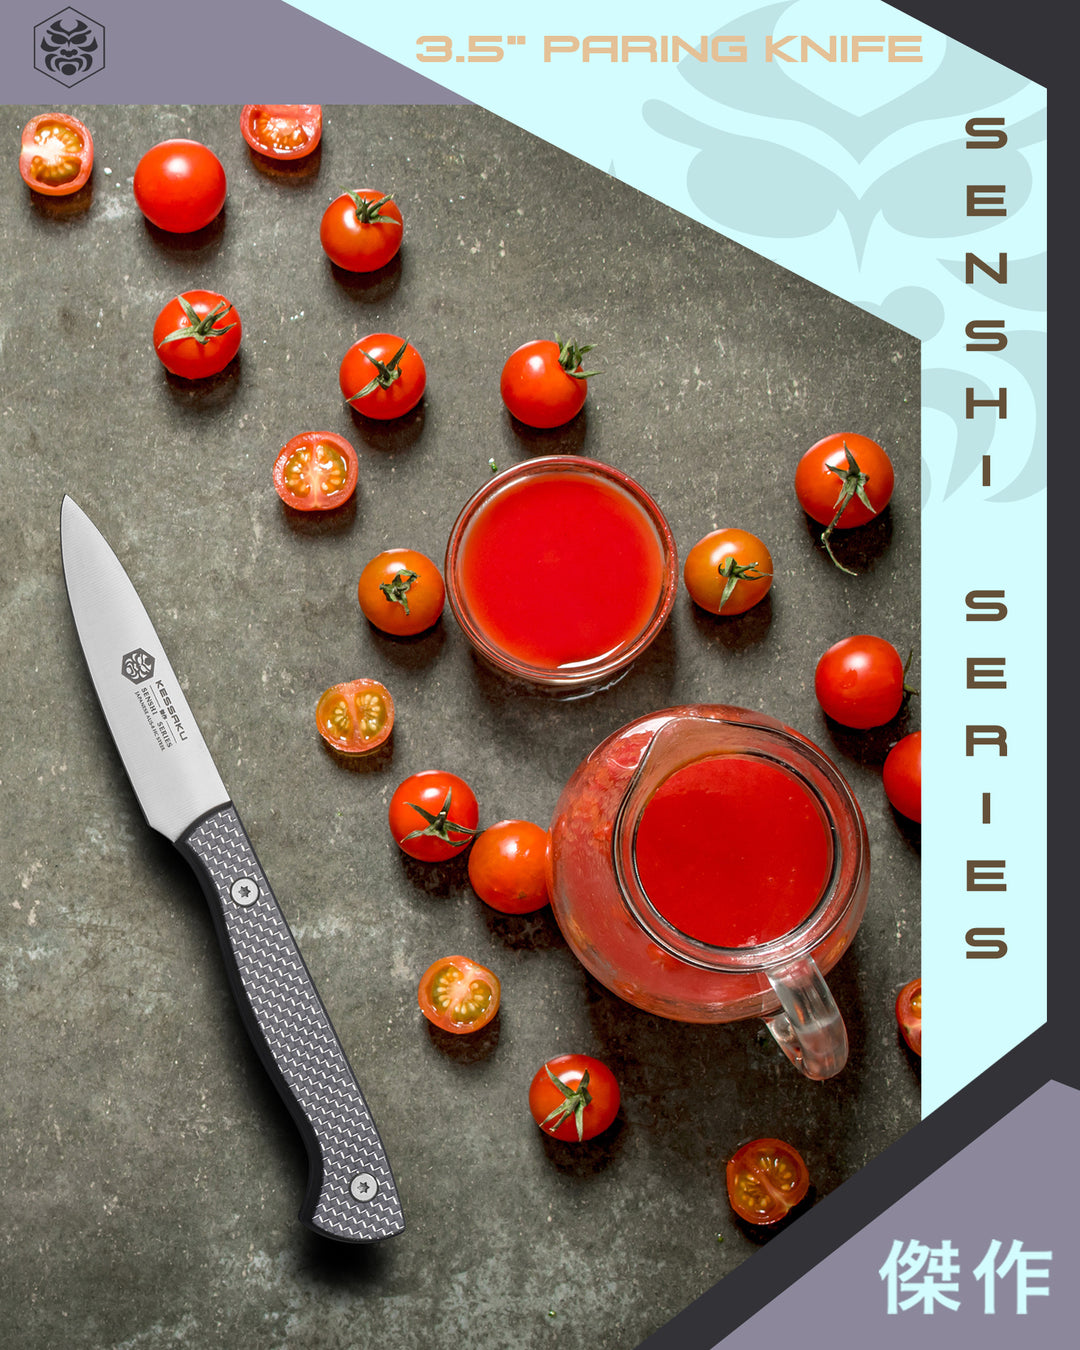 The Senshi Series Paring Knife next to oodles of cherry tomatoes, from which tomato juice is made